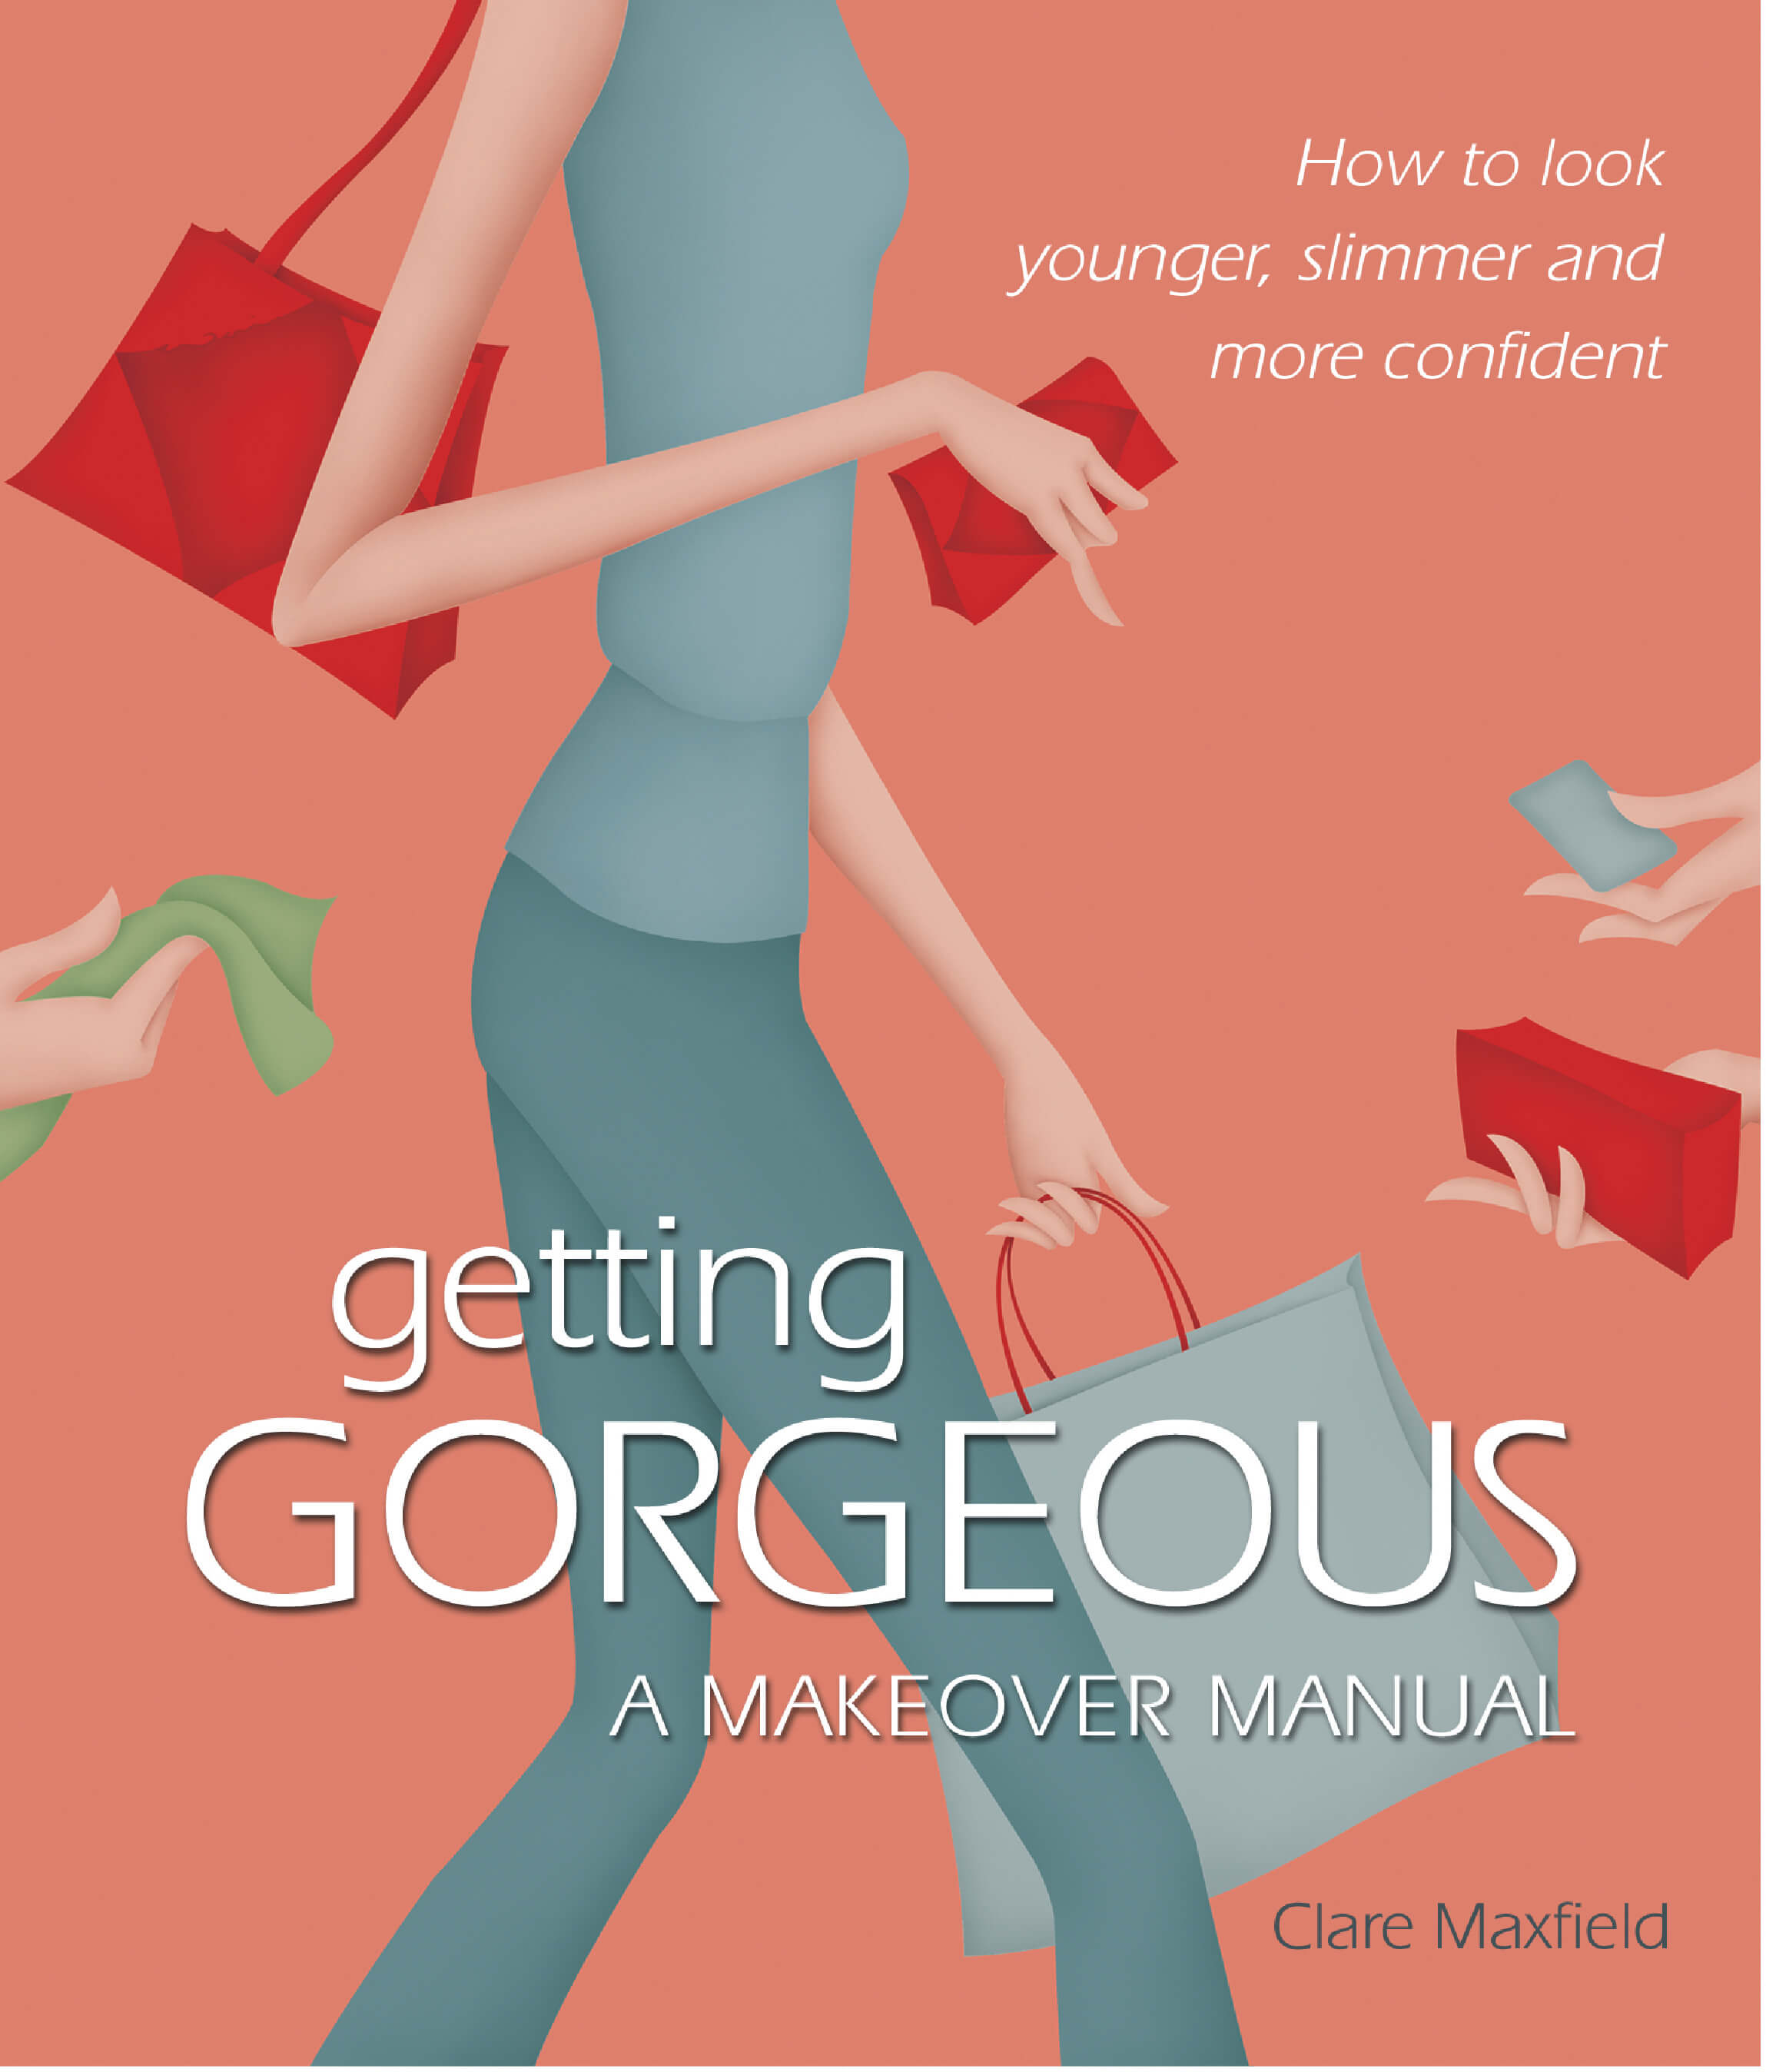 Getting Gorgeous: A Makeover Manual